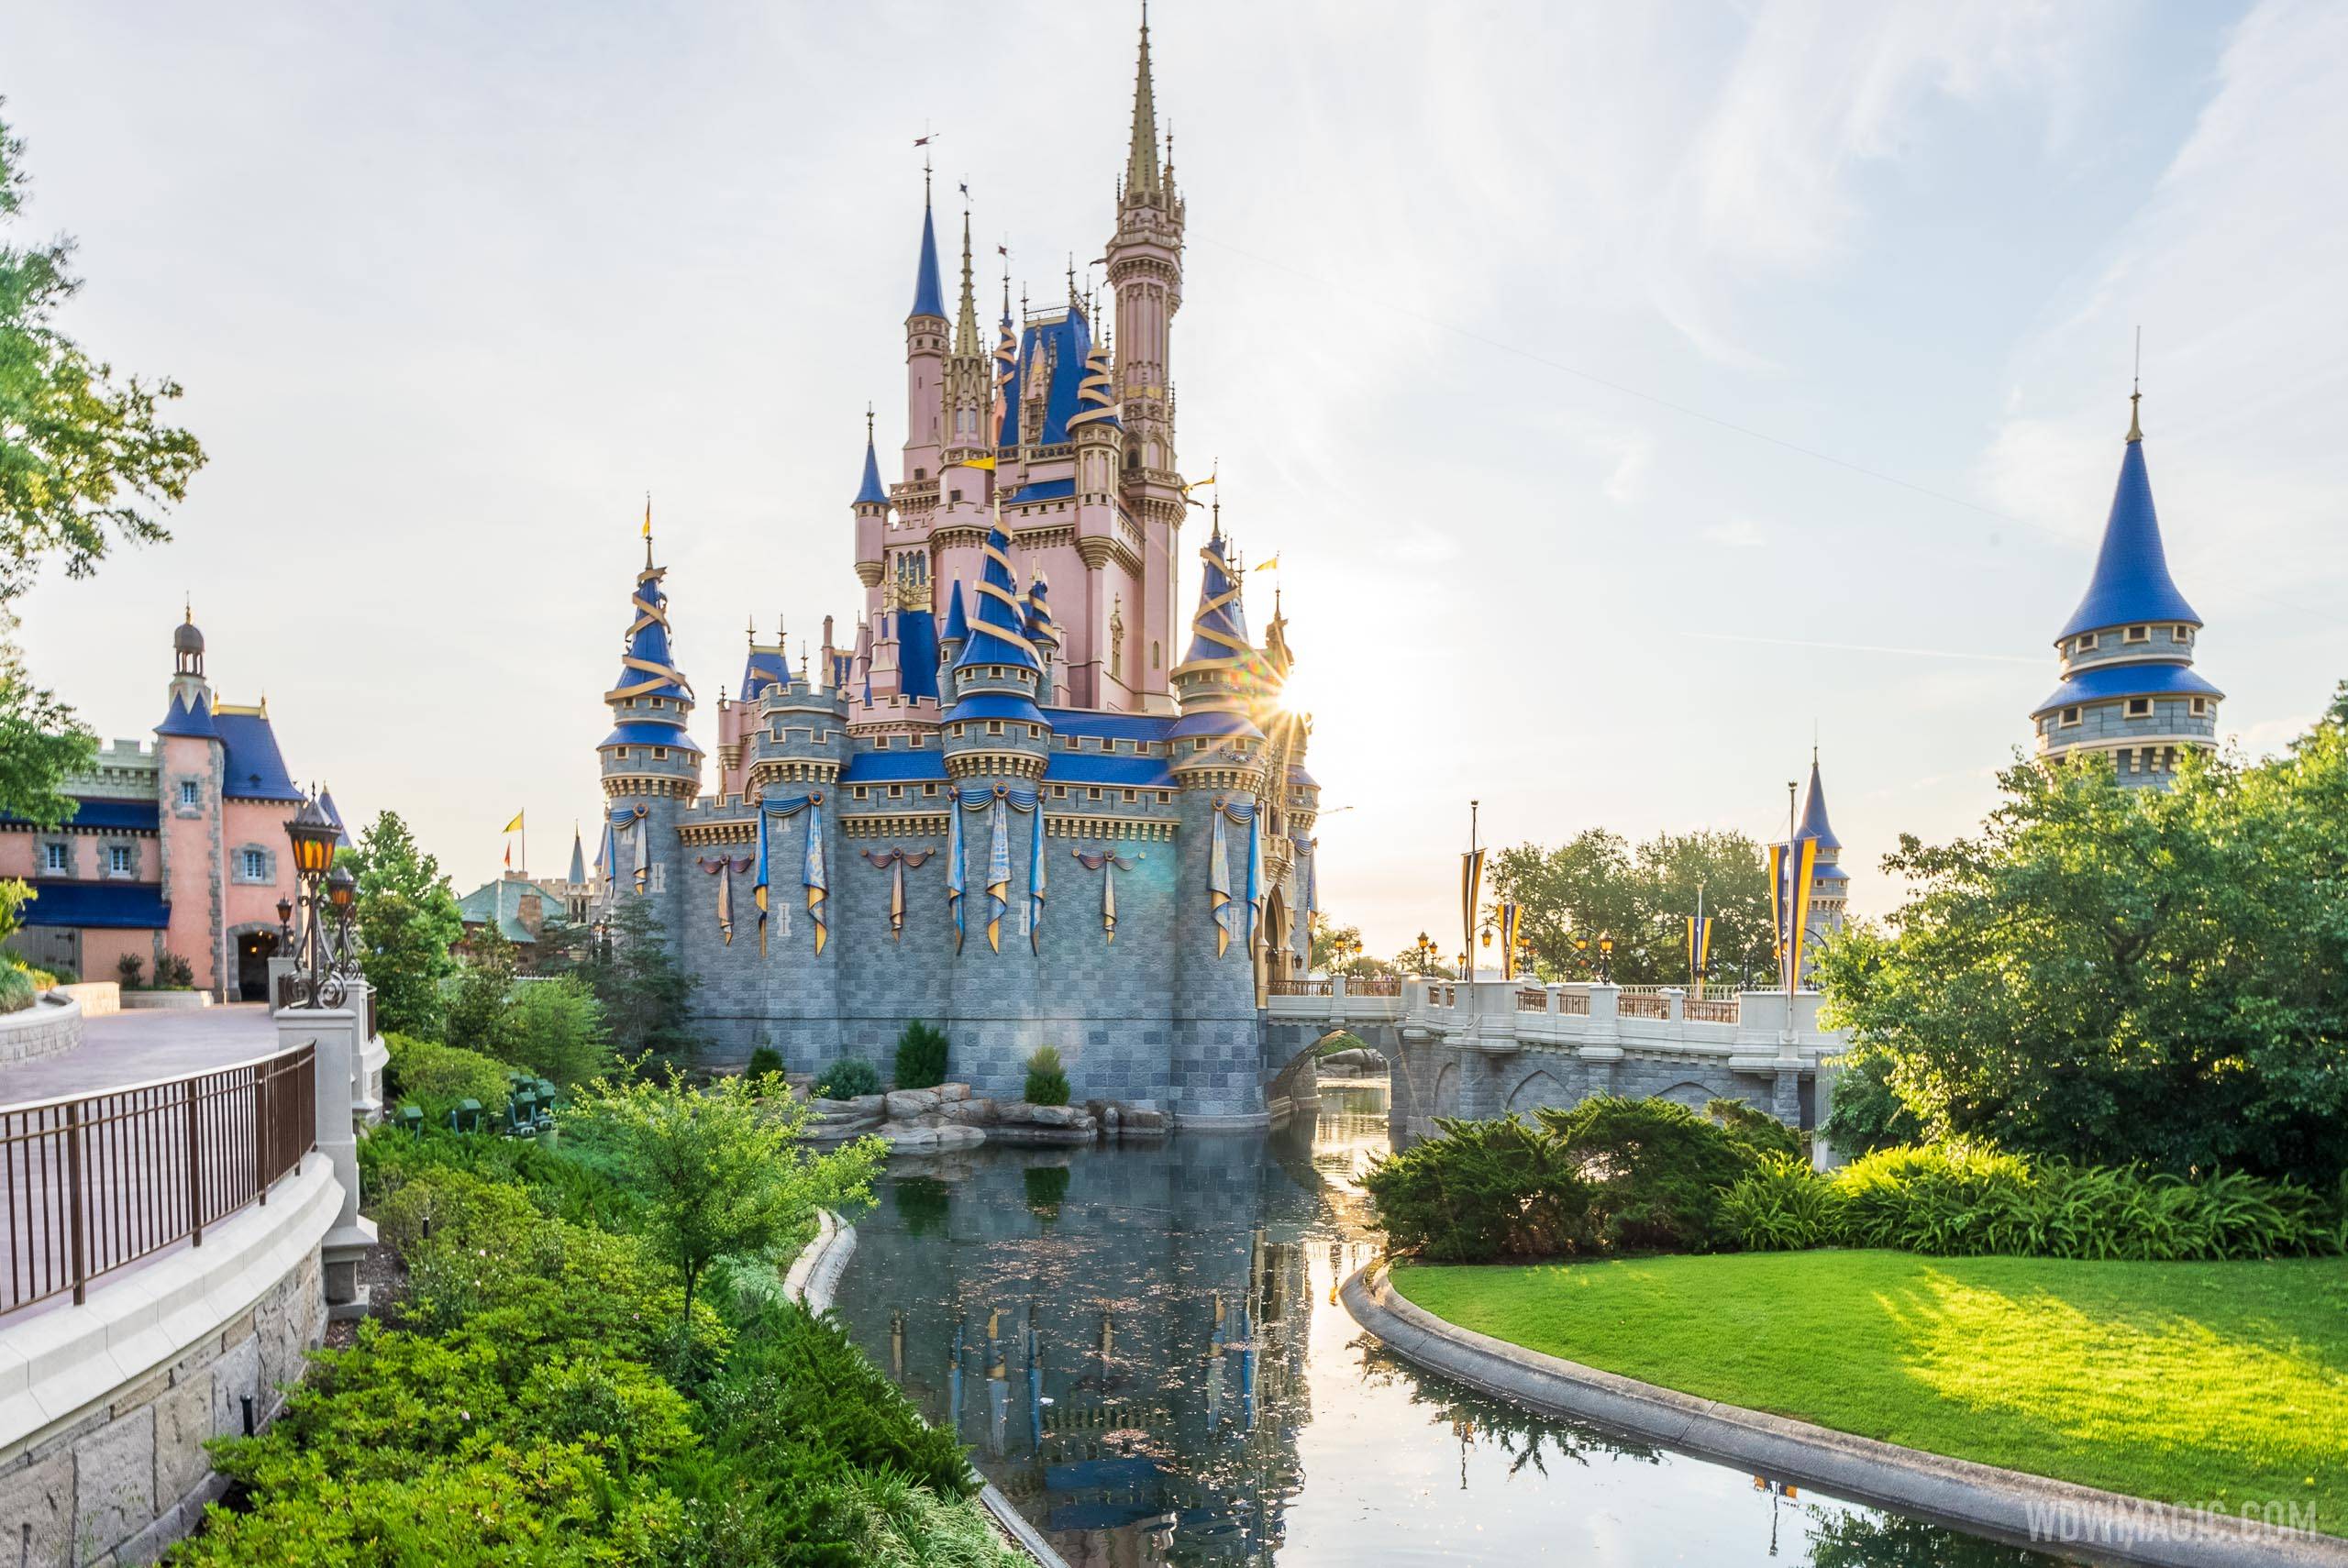 Moat refilled at Cinderella Castle - May 2021